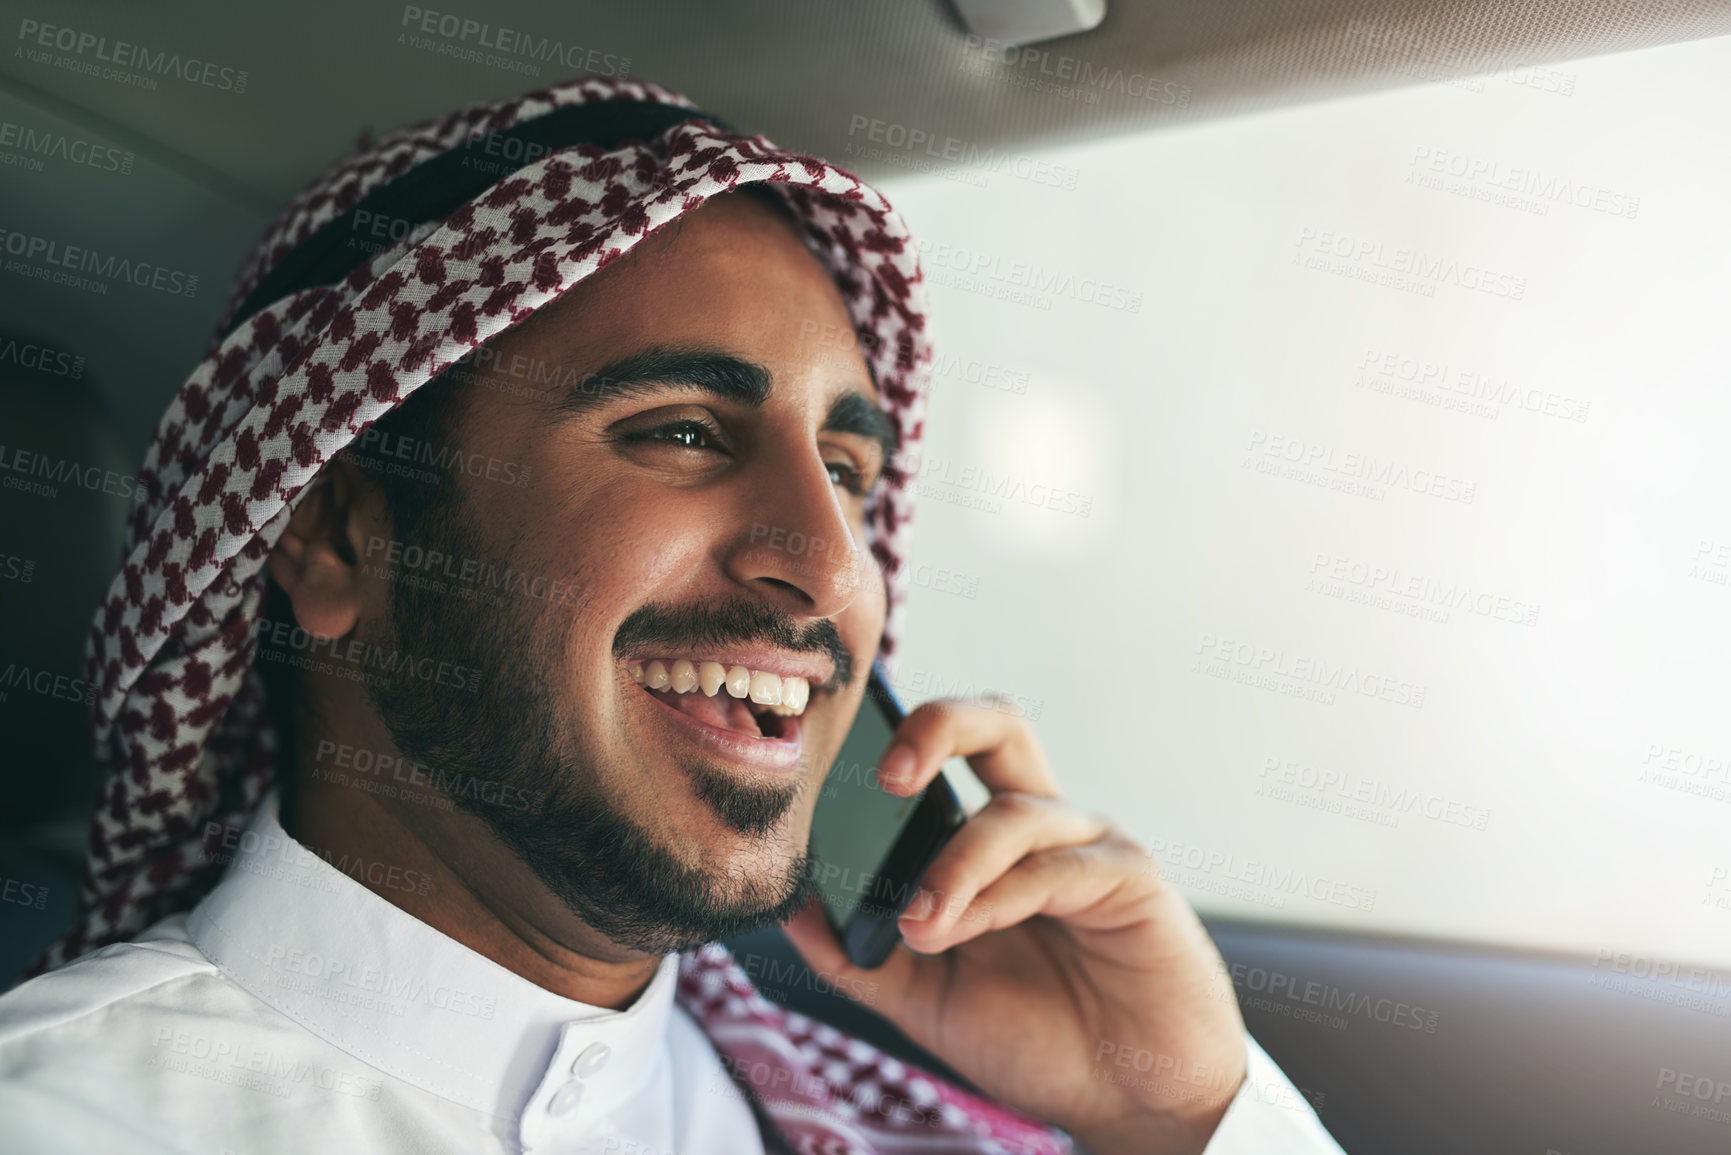 Buy stock photo Shot of a young muslim businessman using his phone while traveling in a car